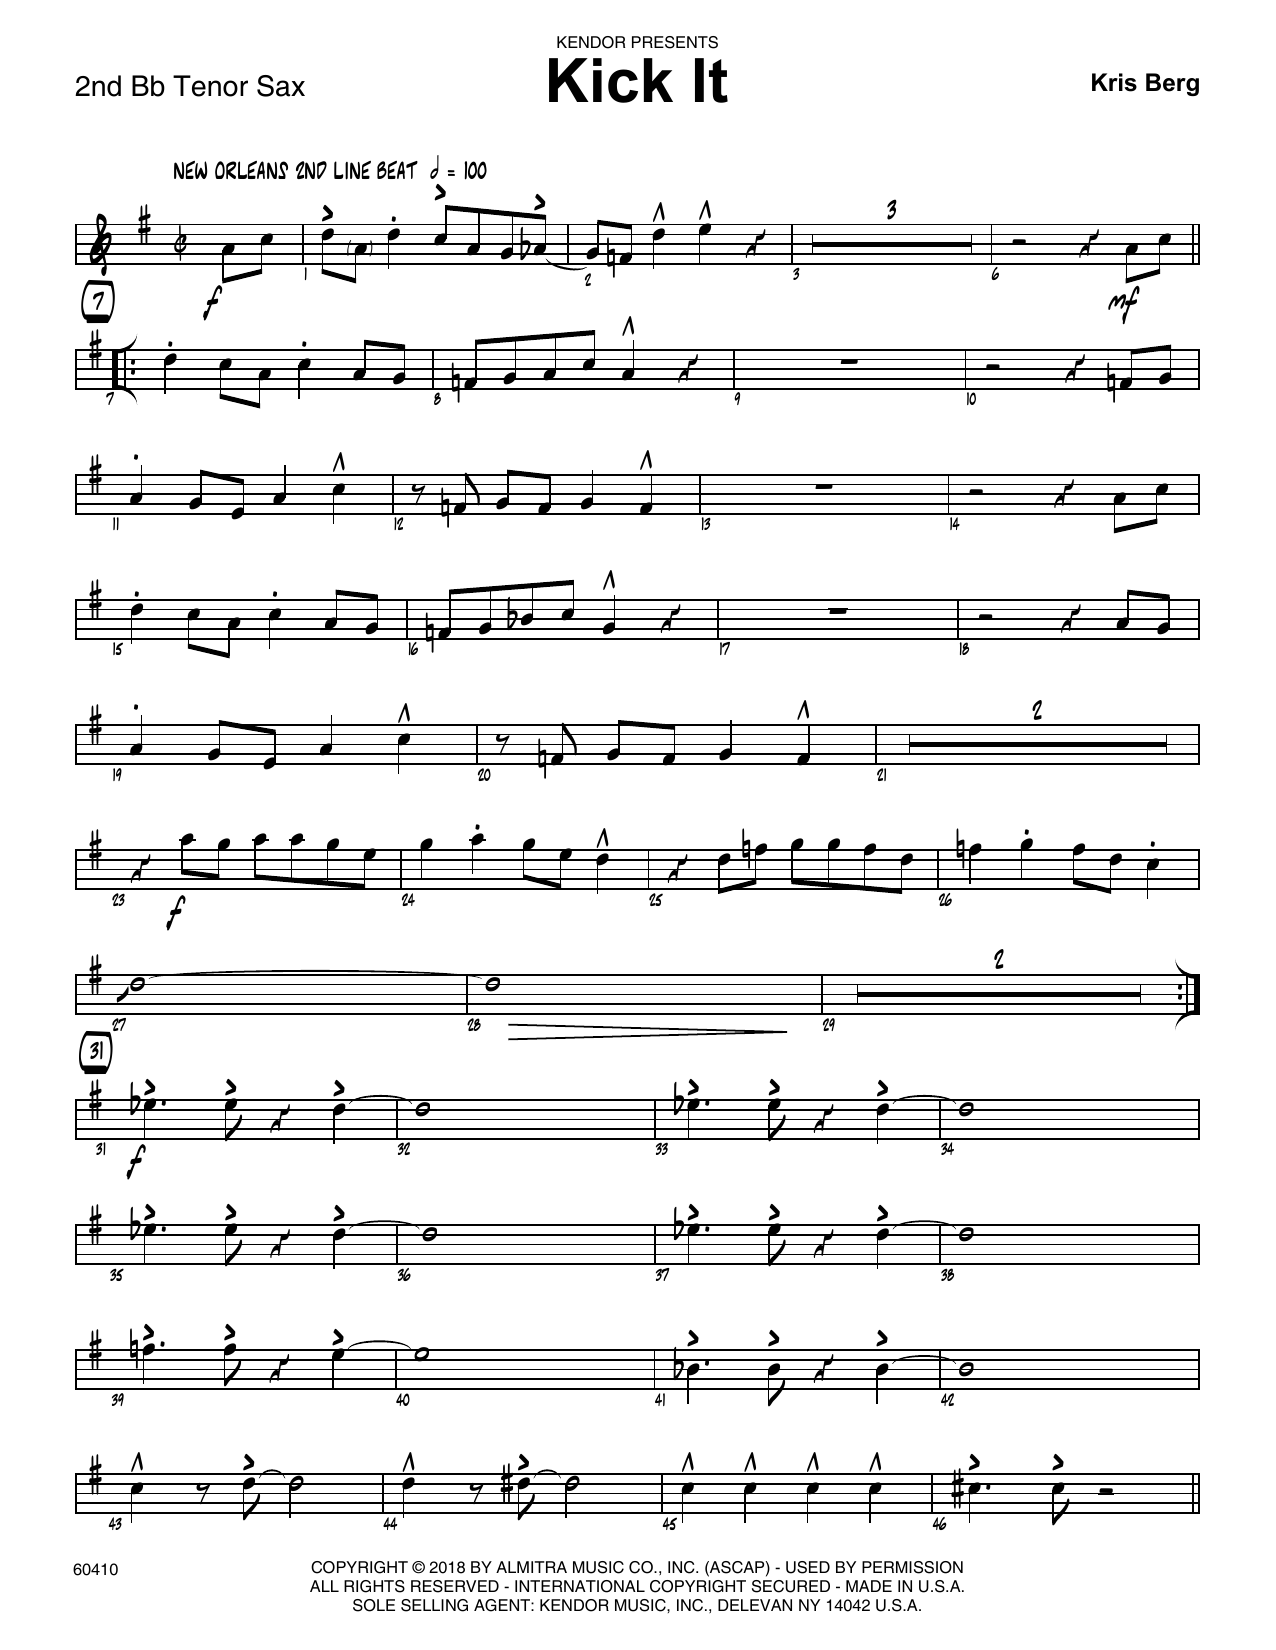 Kris Berg Kick It - 2nd Bb Tenor Saxophone sheet music preview music notes and score for Jazz Ensemble including 4 page(s)